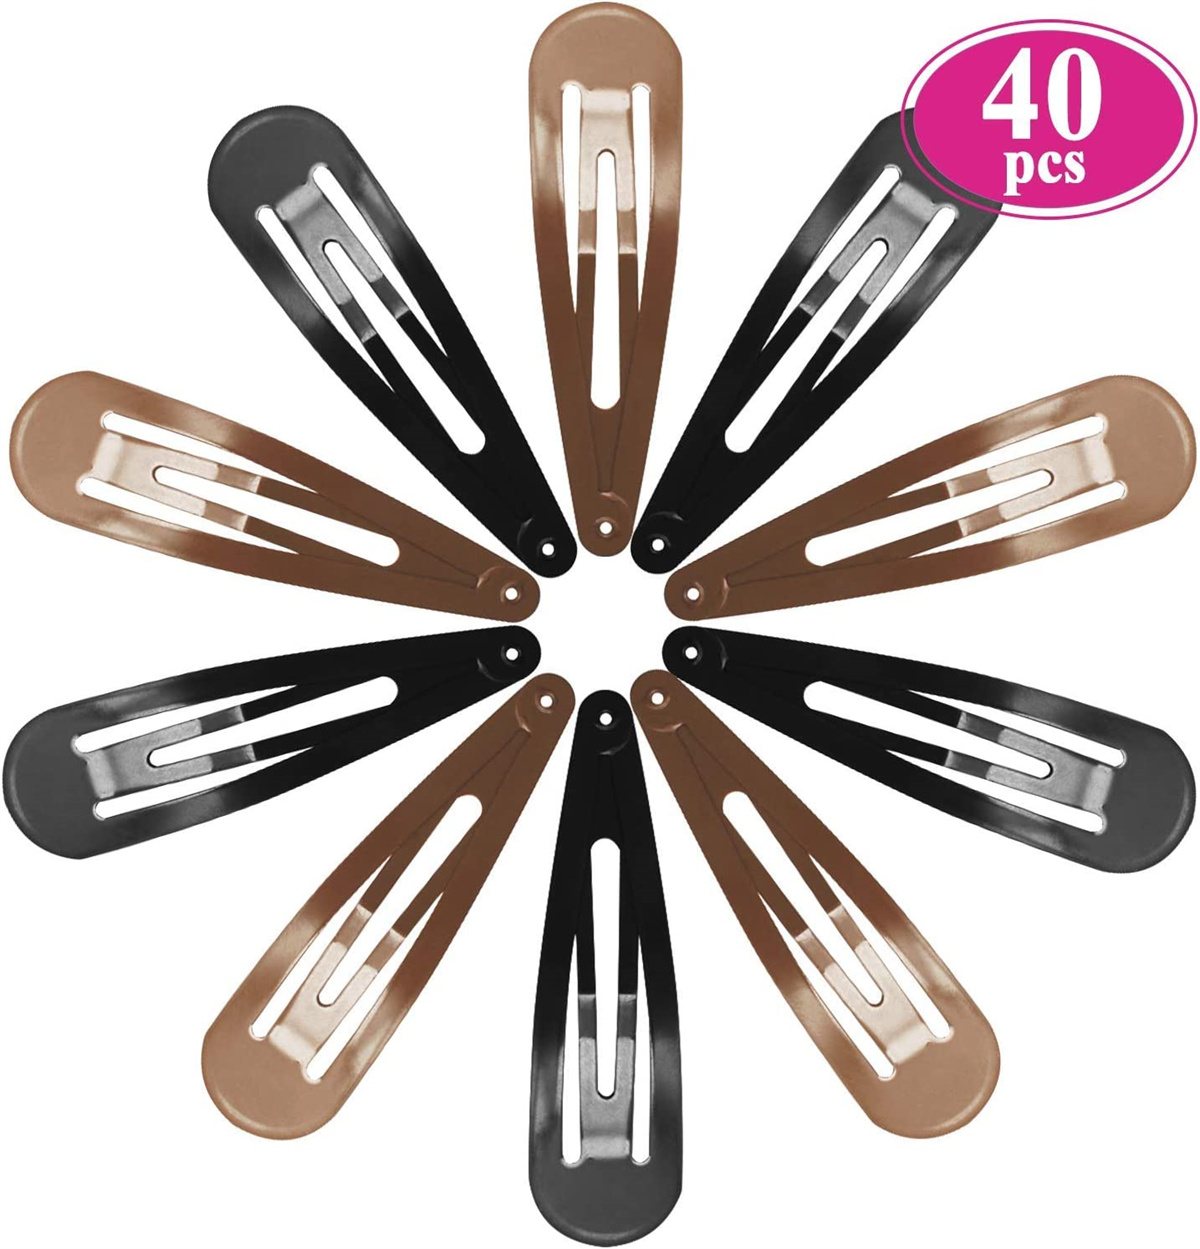 2.8 inch Large Metal Snap Hair Clips, Casewin 40 Pcs No Slip Metal Jumbo Hair  Clip Hair Pins Craft DIY Accessories for Girls Women, 7cm, Black and Brown  